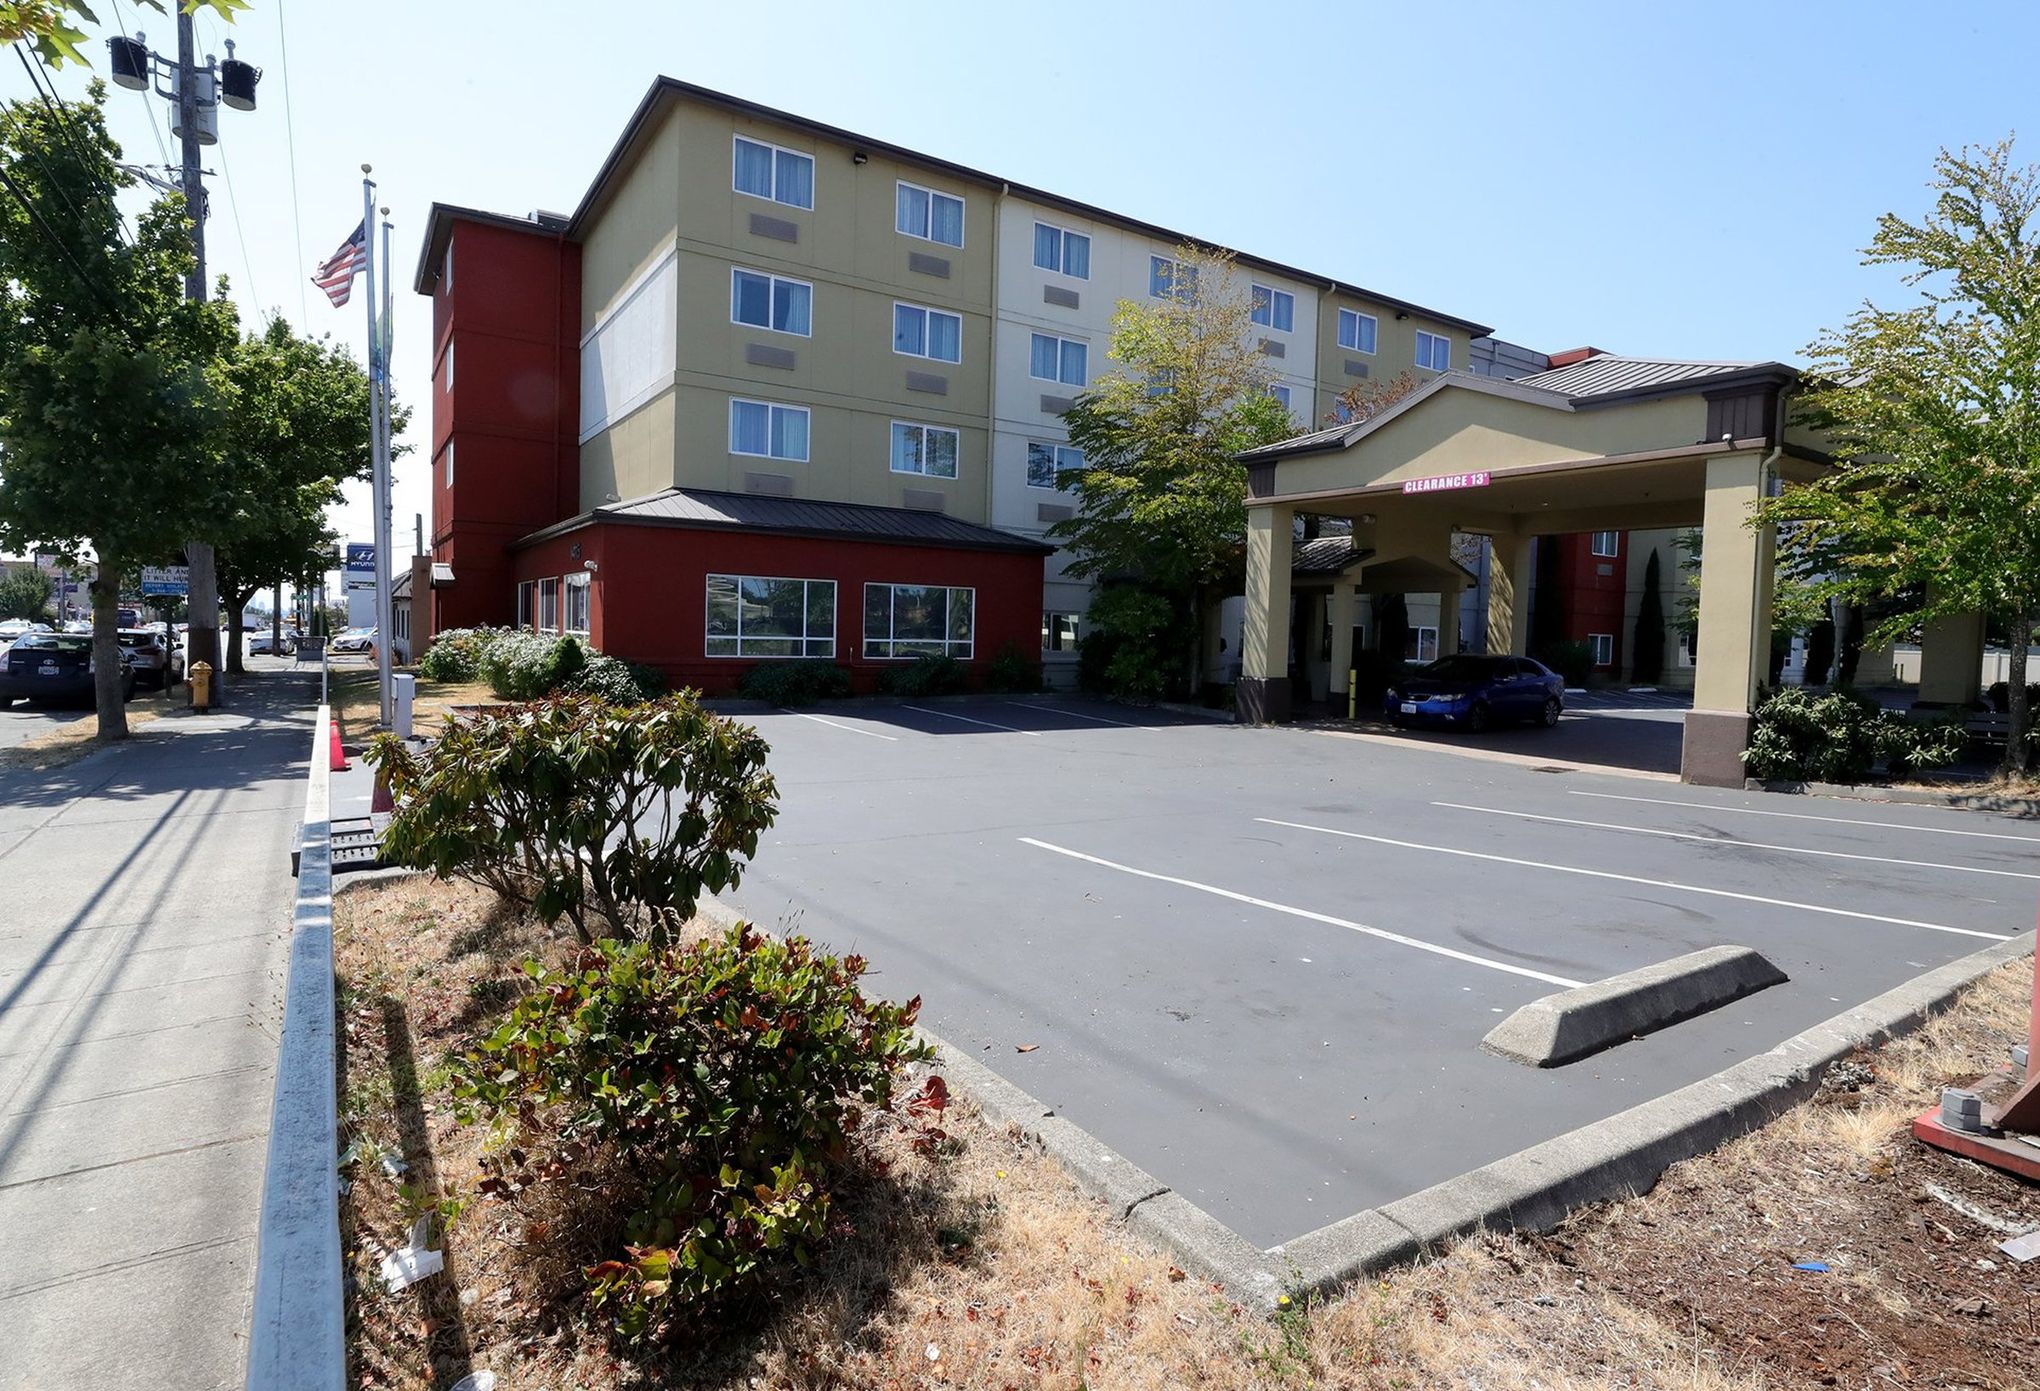 57 people from one Seattle homeless encampment got hotel rooms